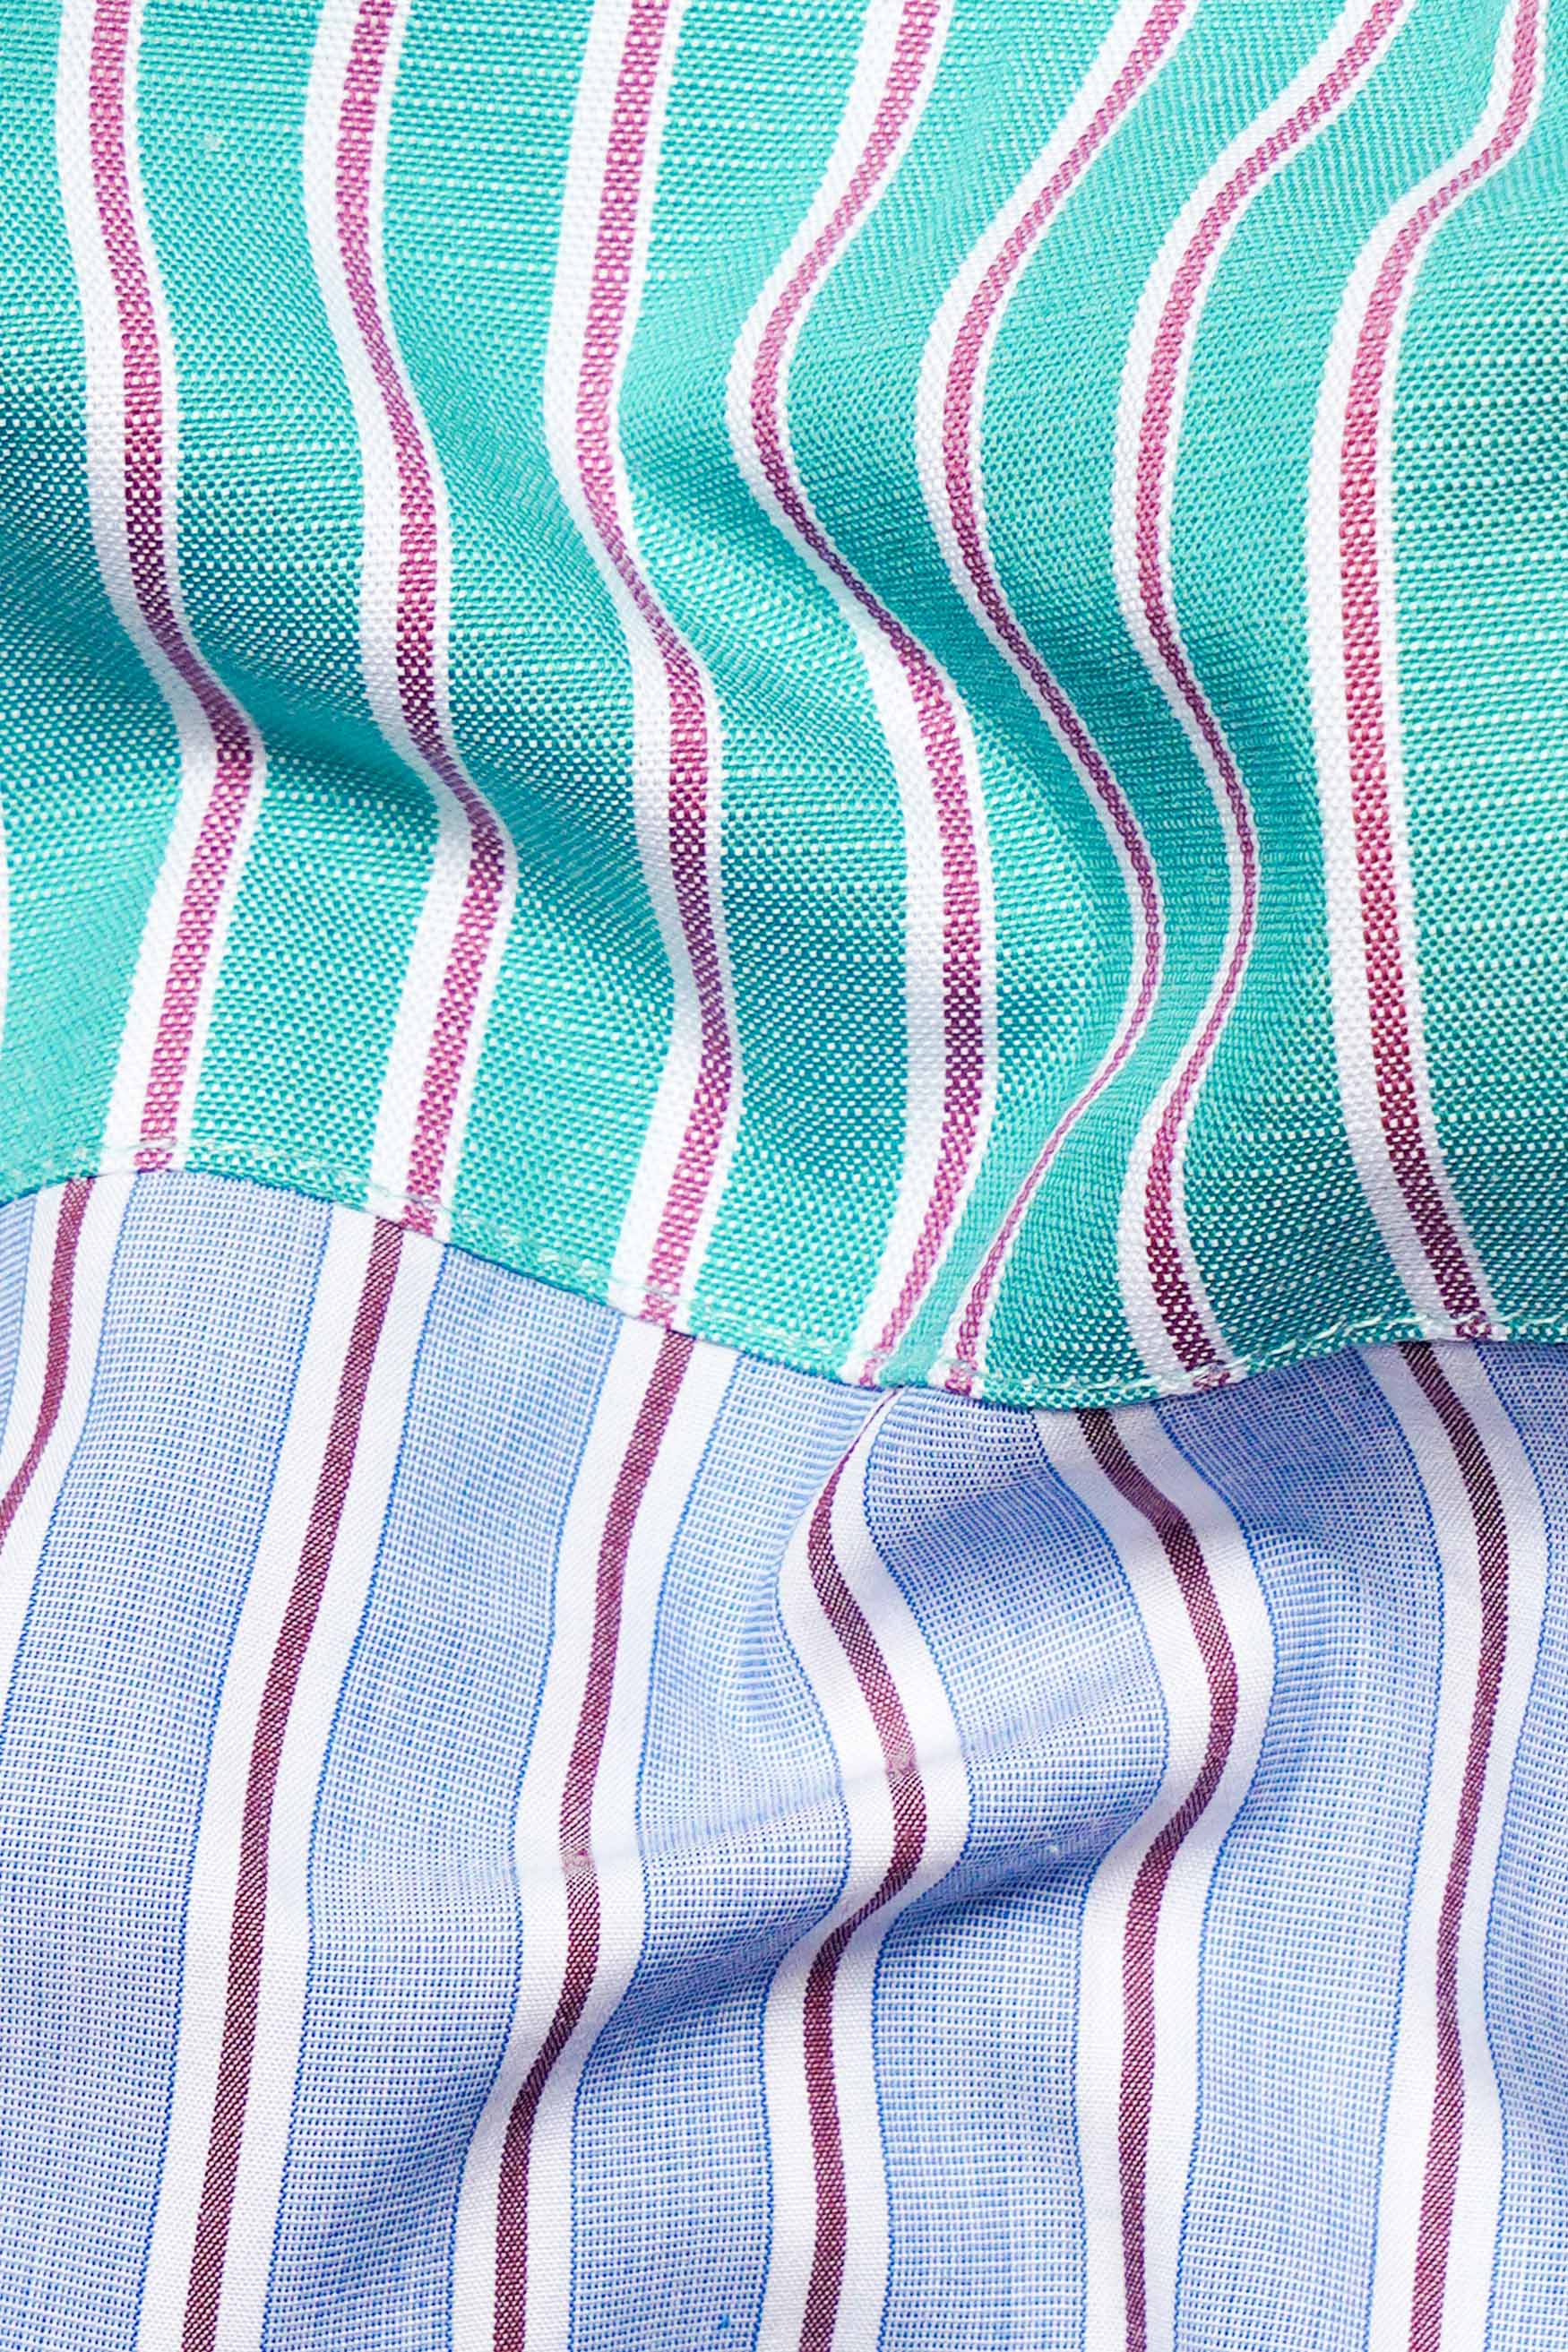 Downy Green and Periwinkle Blue Striped Premium Cotton Designer Shirt 11578-P467-38, 11578-P467-H-38, 11578-P467-39, 11578-P467-H-39, 11578-P467-40, 11578-P467-H-40, 11578-P467-42, 11578-P467-H-42, 11578-P467-44, 11578-P467-H-44, 11578-P467-46, 11578-P467-H-46, 11578-P467-48, 11578-P467-H-48, 11578-P467-50, 11578-P467-H-50, 11578-P467-52, 11578-P467-H-52